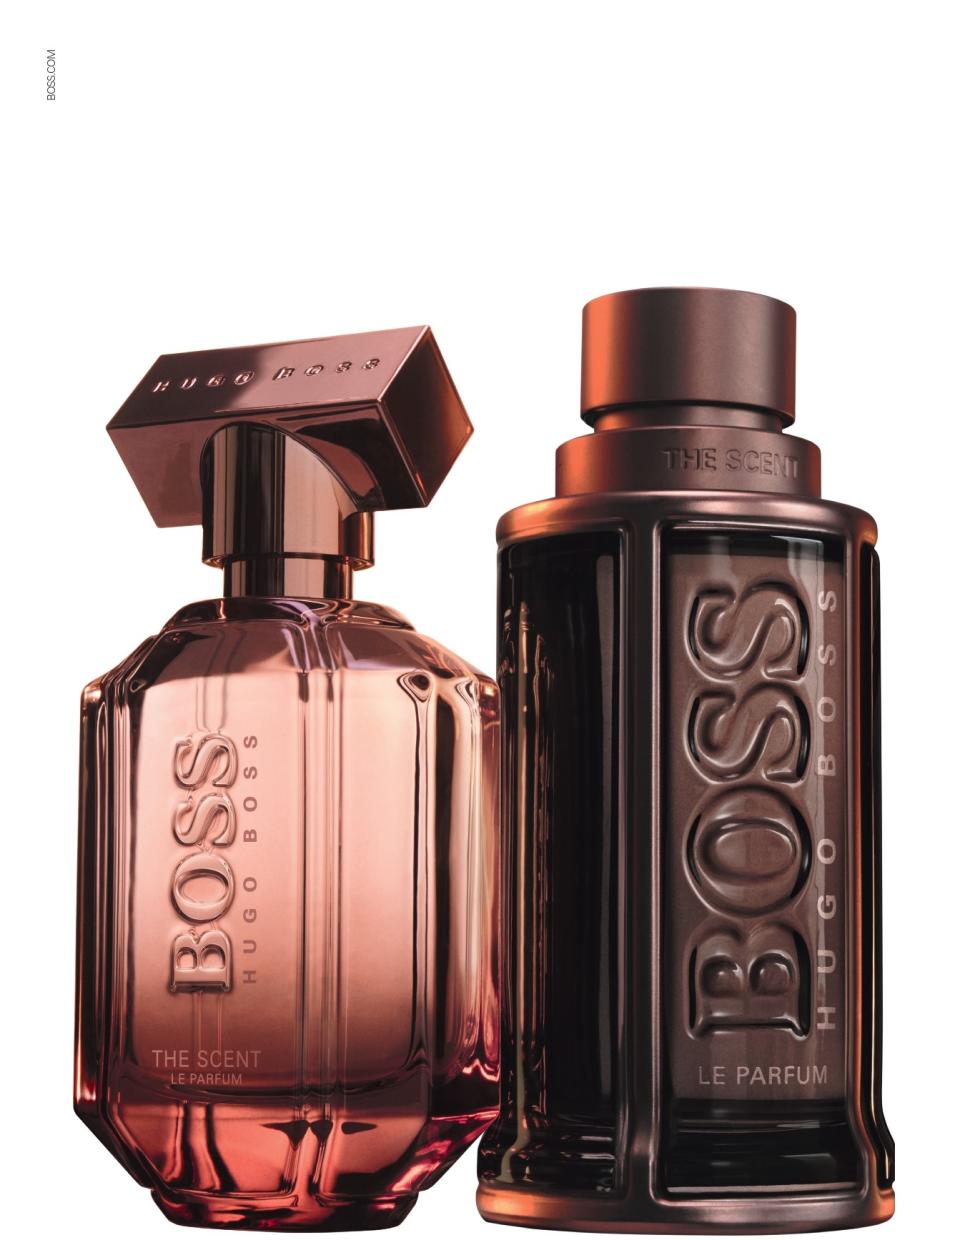 The new Boss The Scent fragrances, which launch on Jan. 15, along with a campaign starring Laura Harrier and Jacob Elordi.